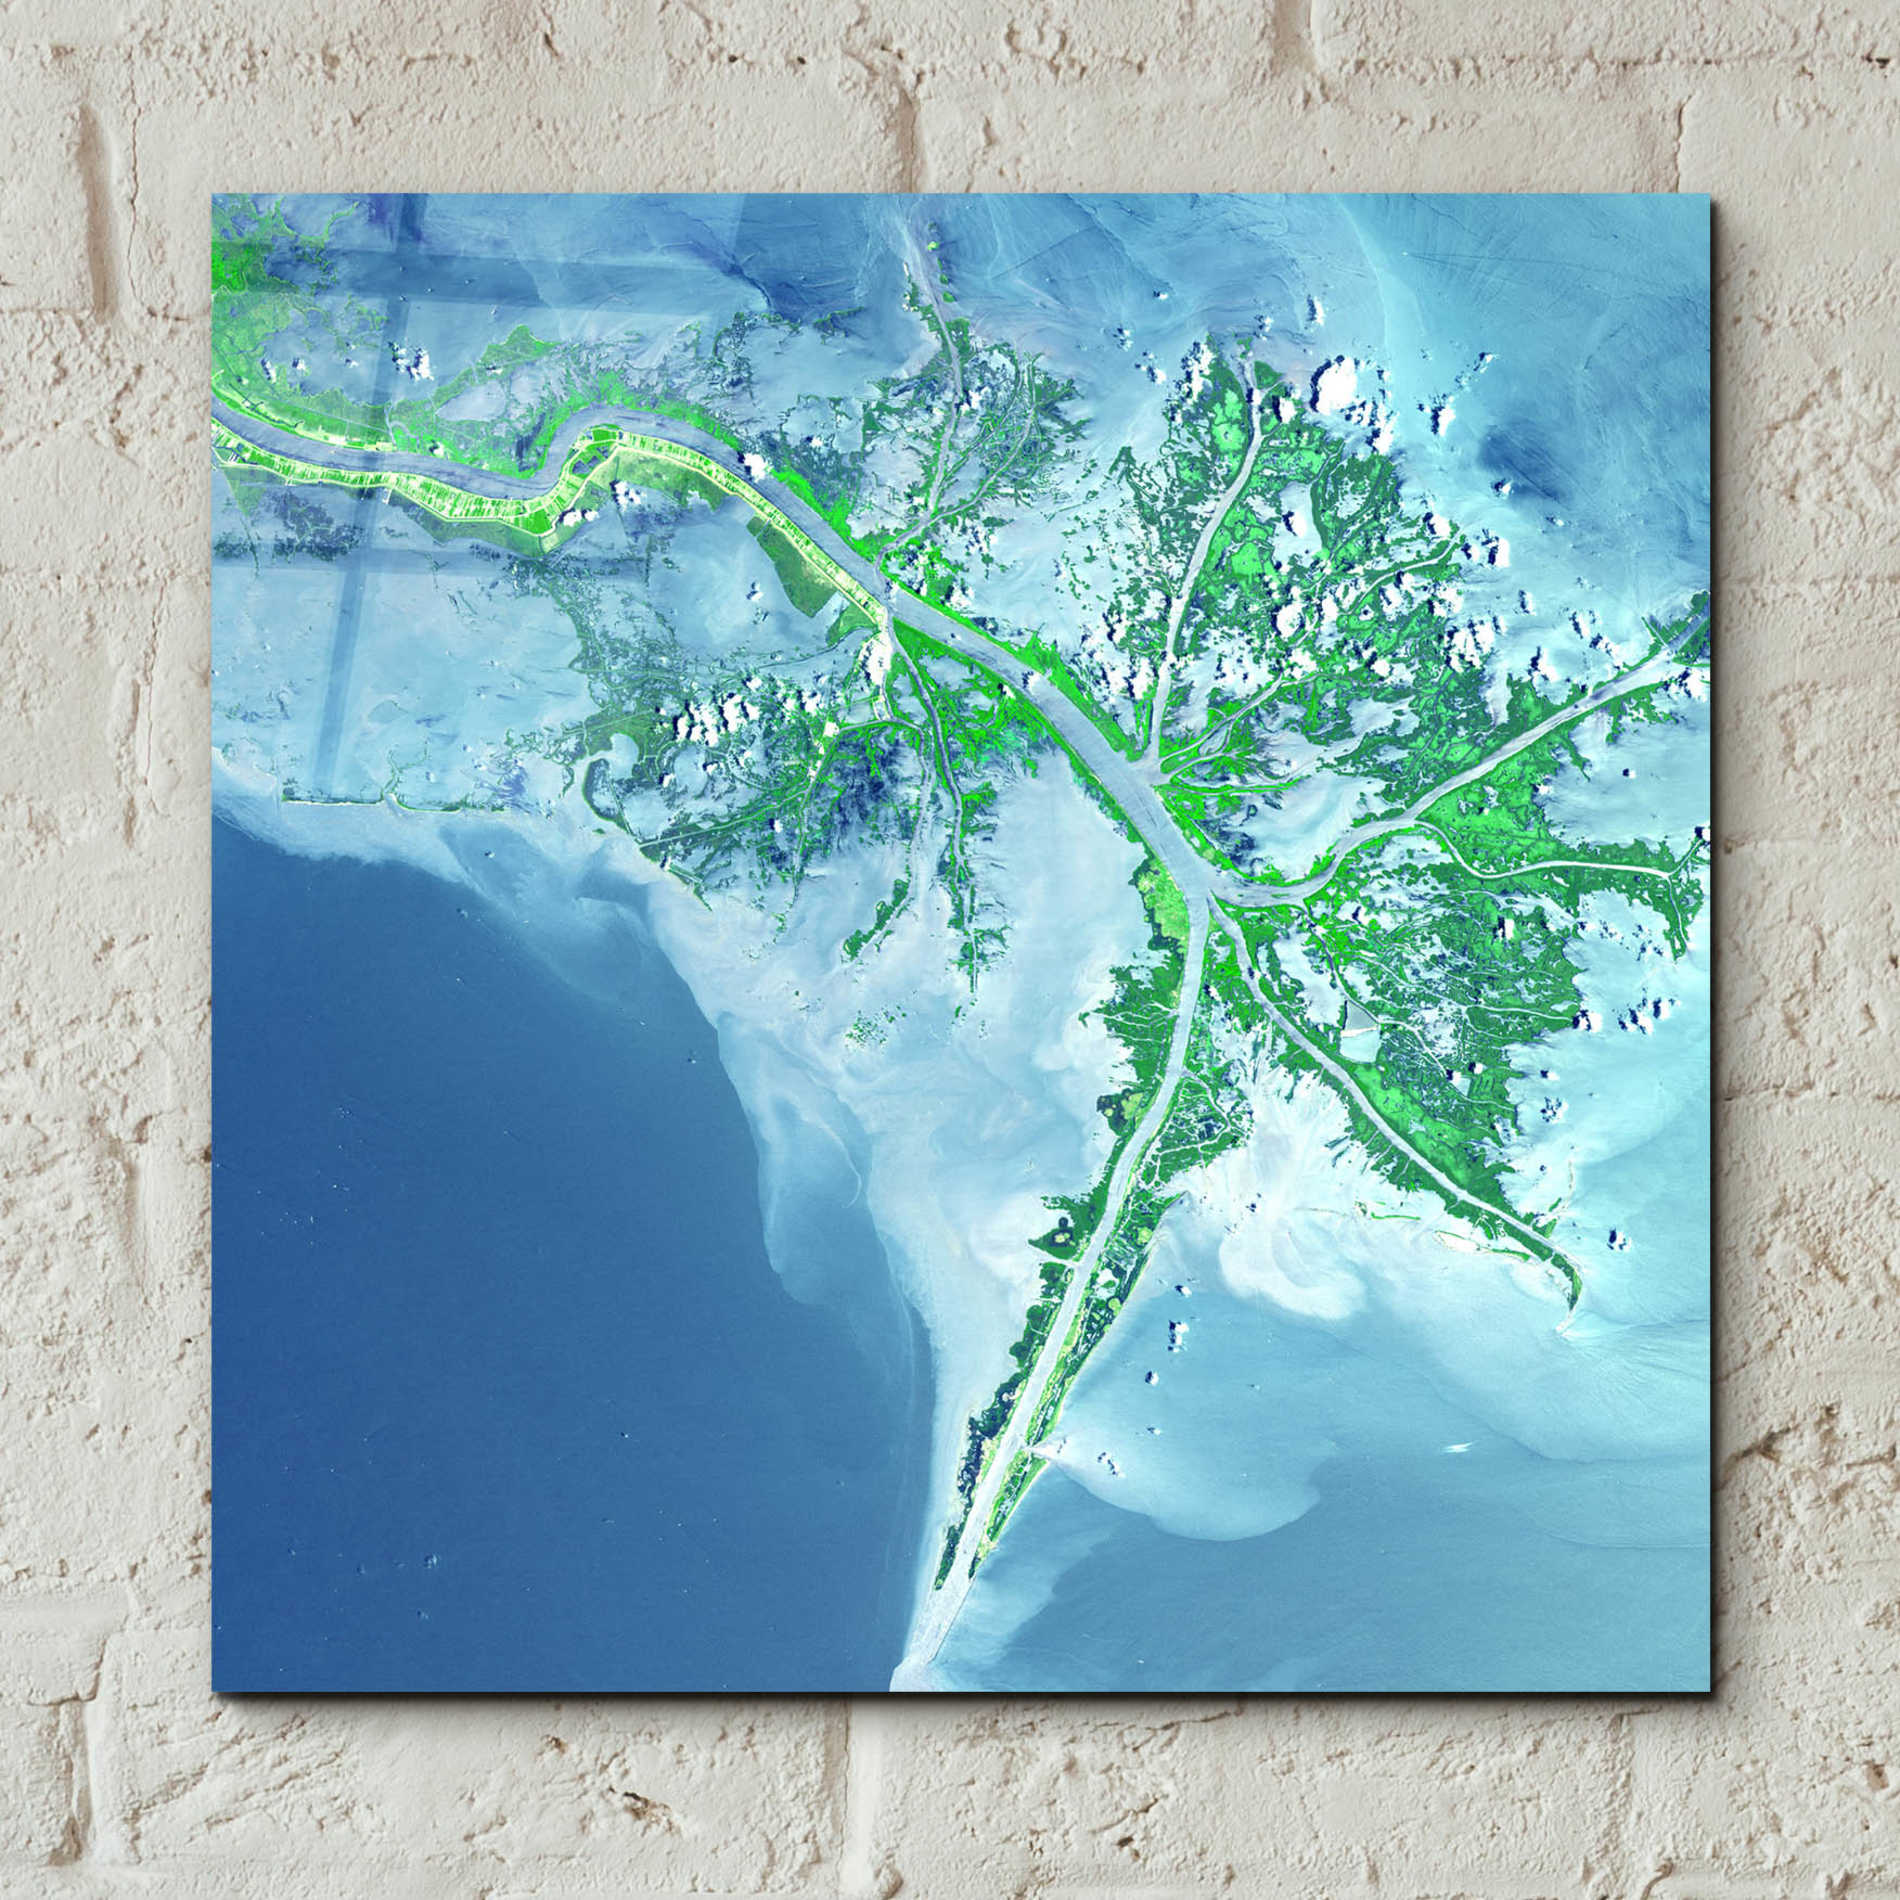 Epic Art 'Earth as Art: Mississippi River Delta' Acrylic Glass Wall Art,12x12